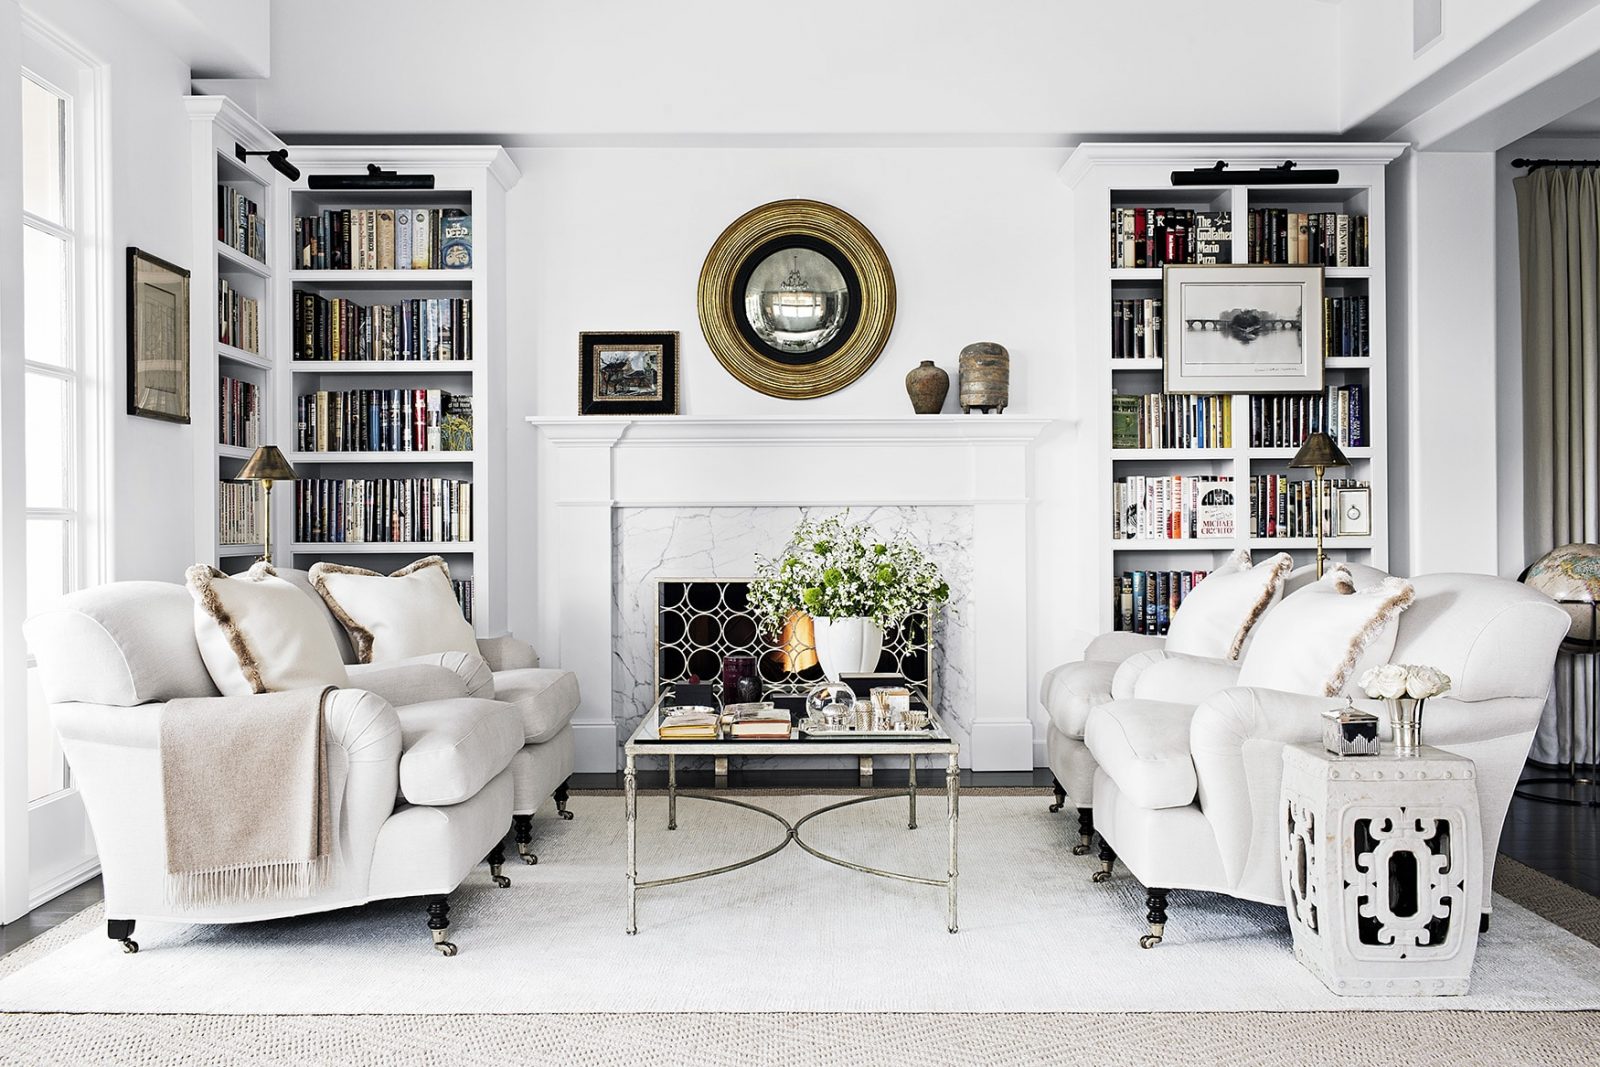 Create a Bookcase around the Fireplace